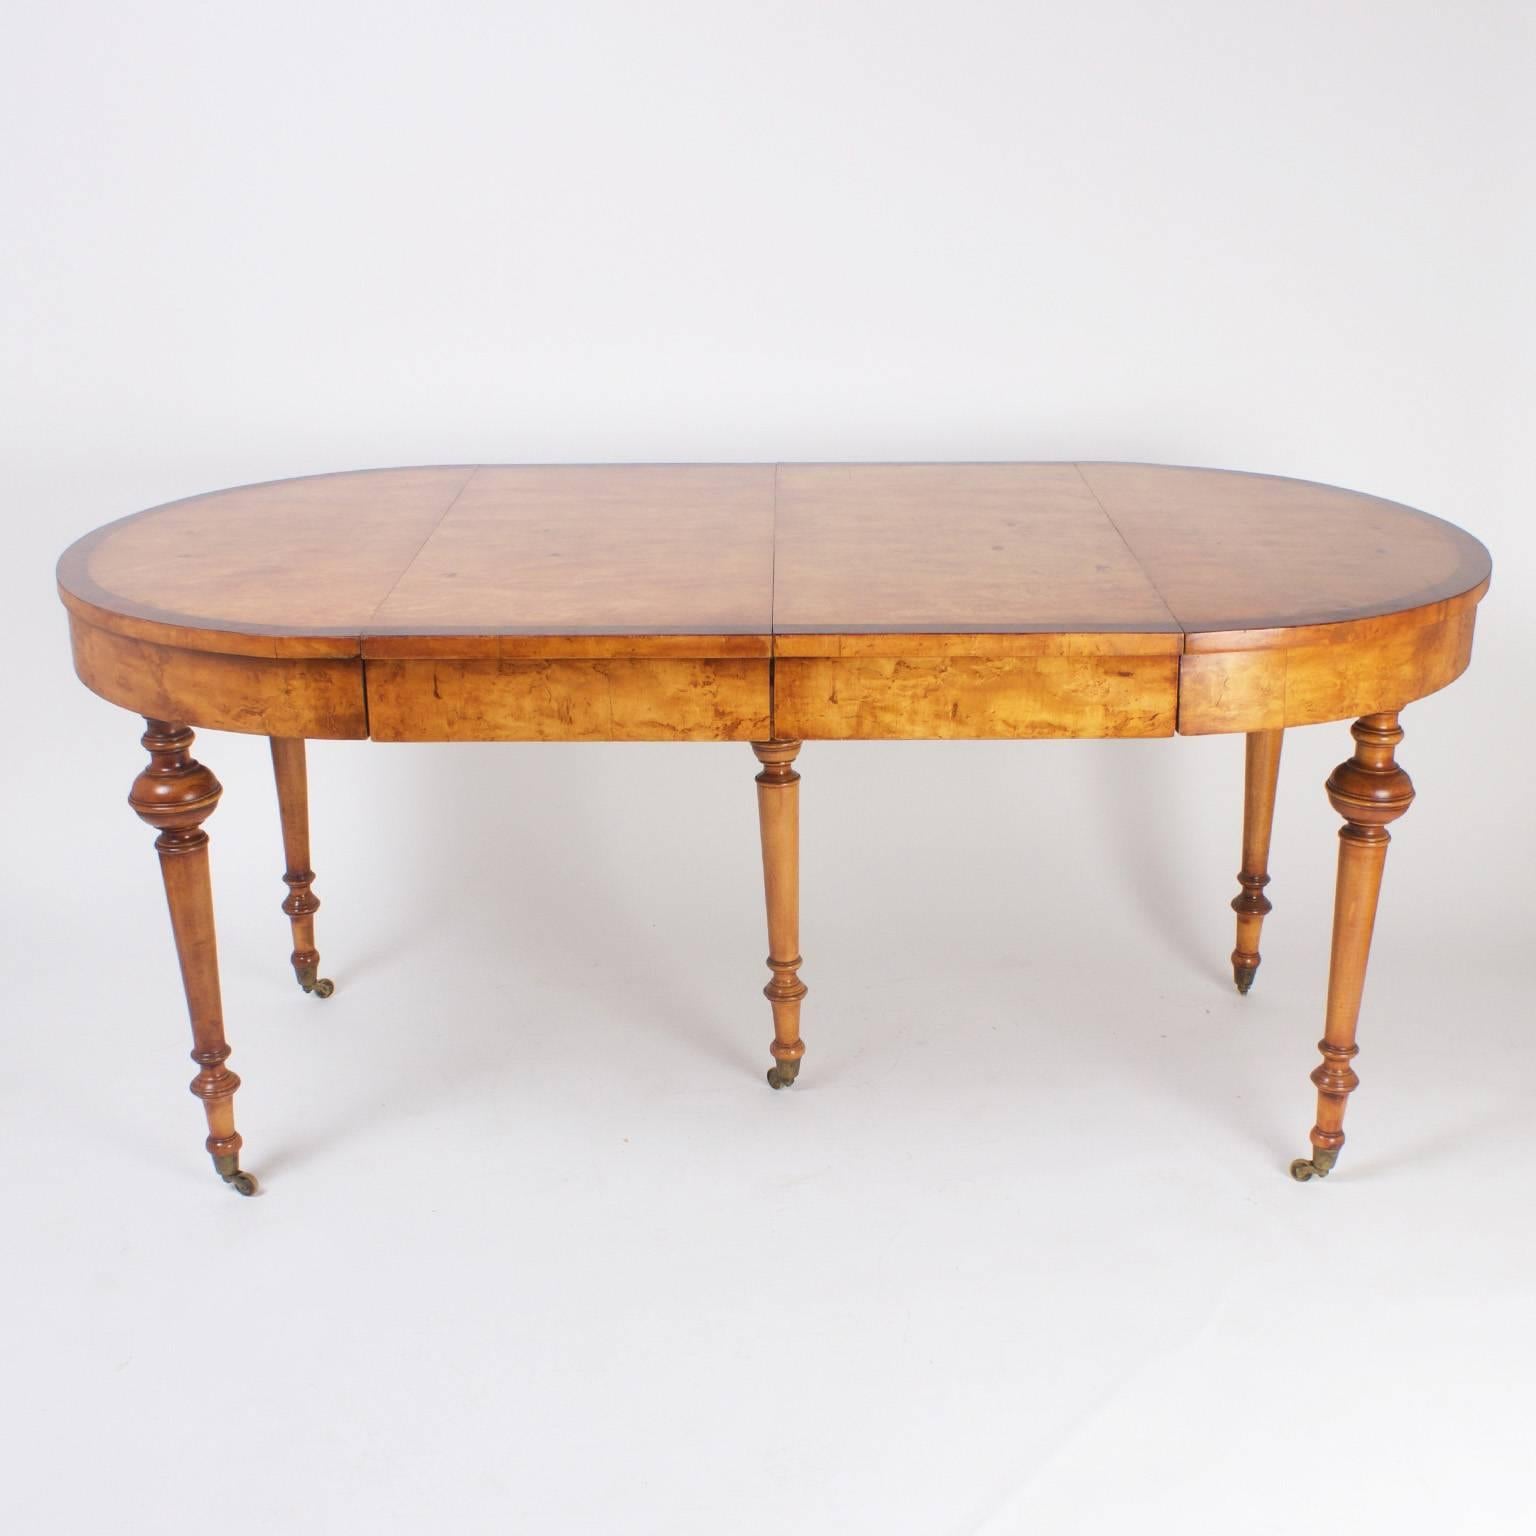 French Napoleon III Expandable Dining Table with a Rare Burled Maple Top